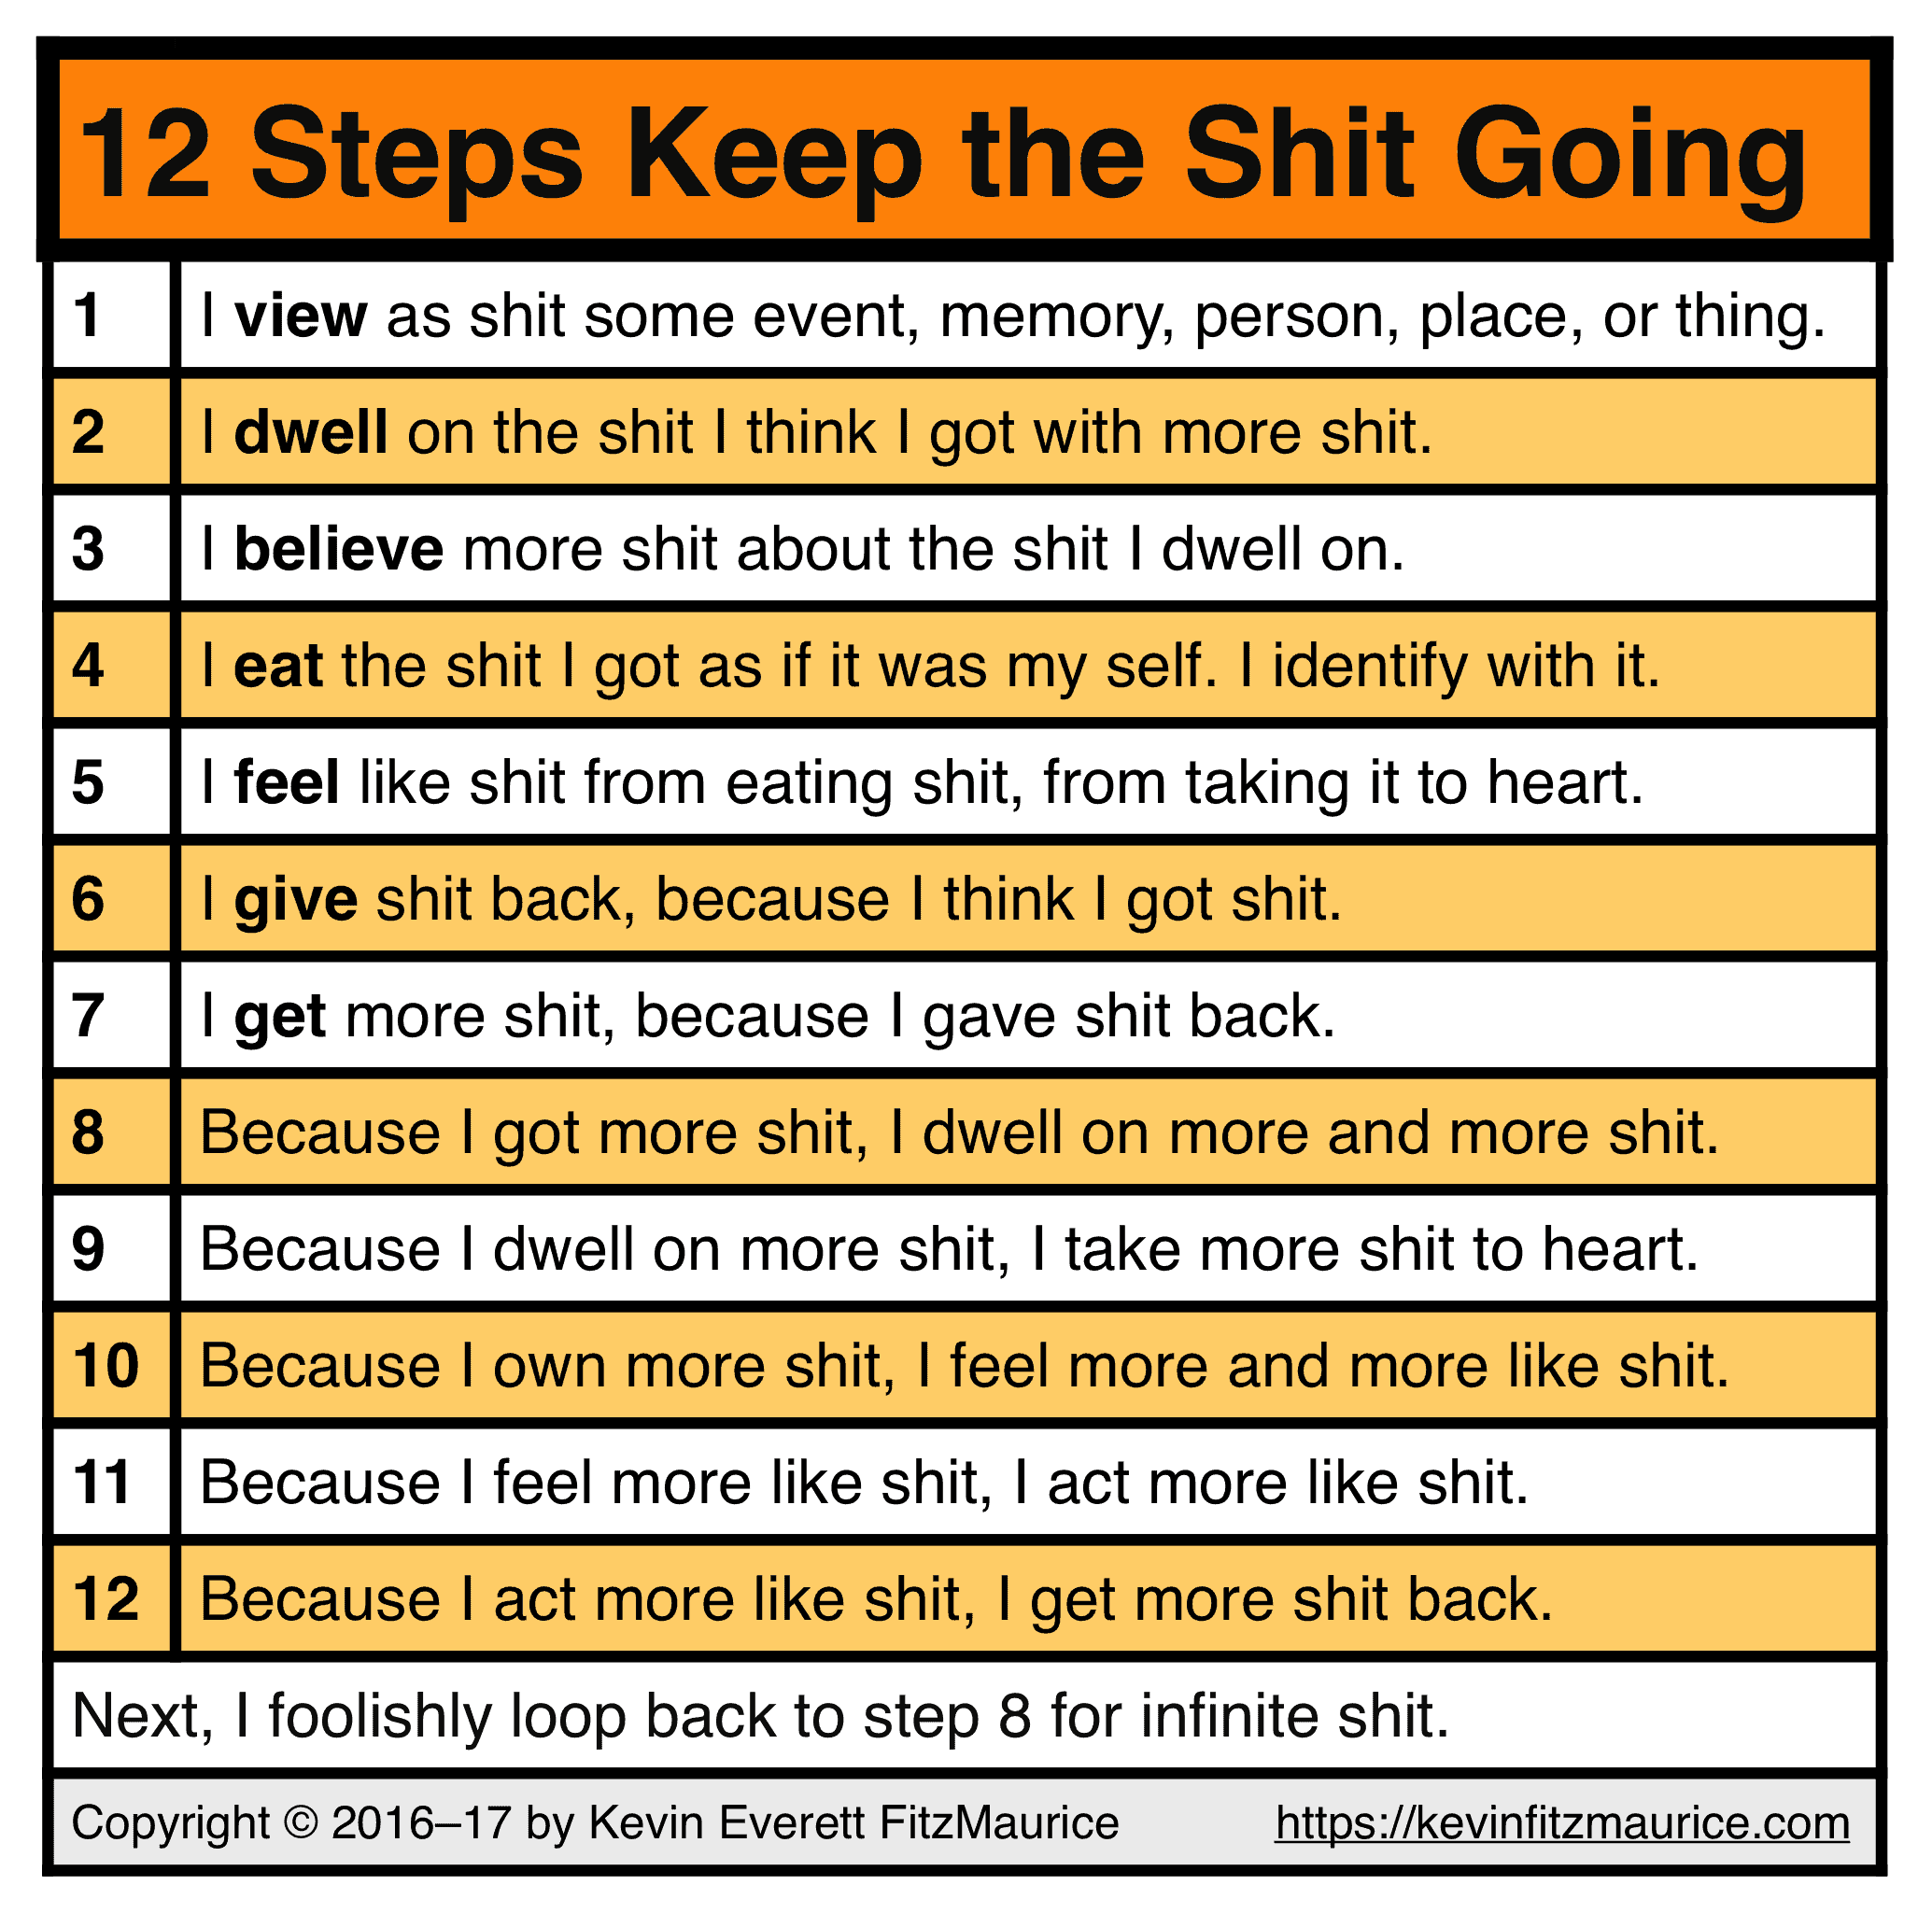 12 Steps Keep the Shit Going